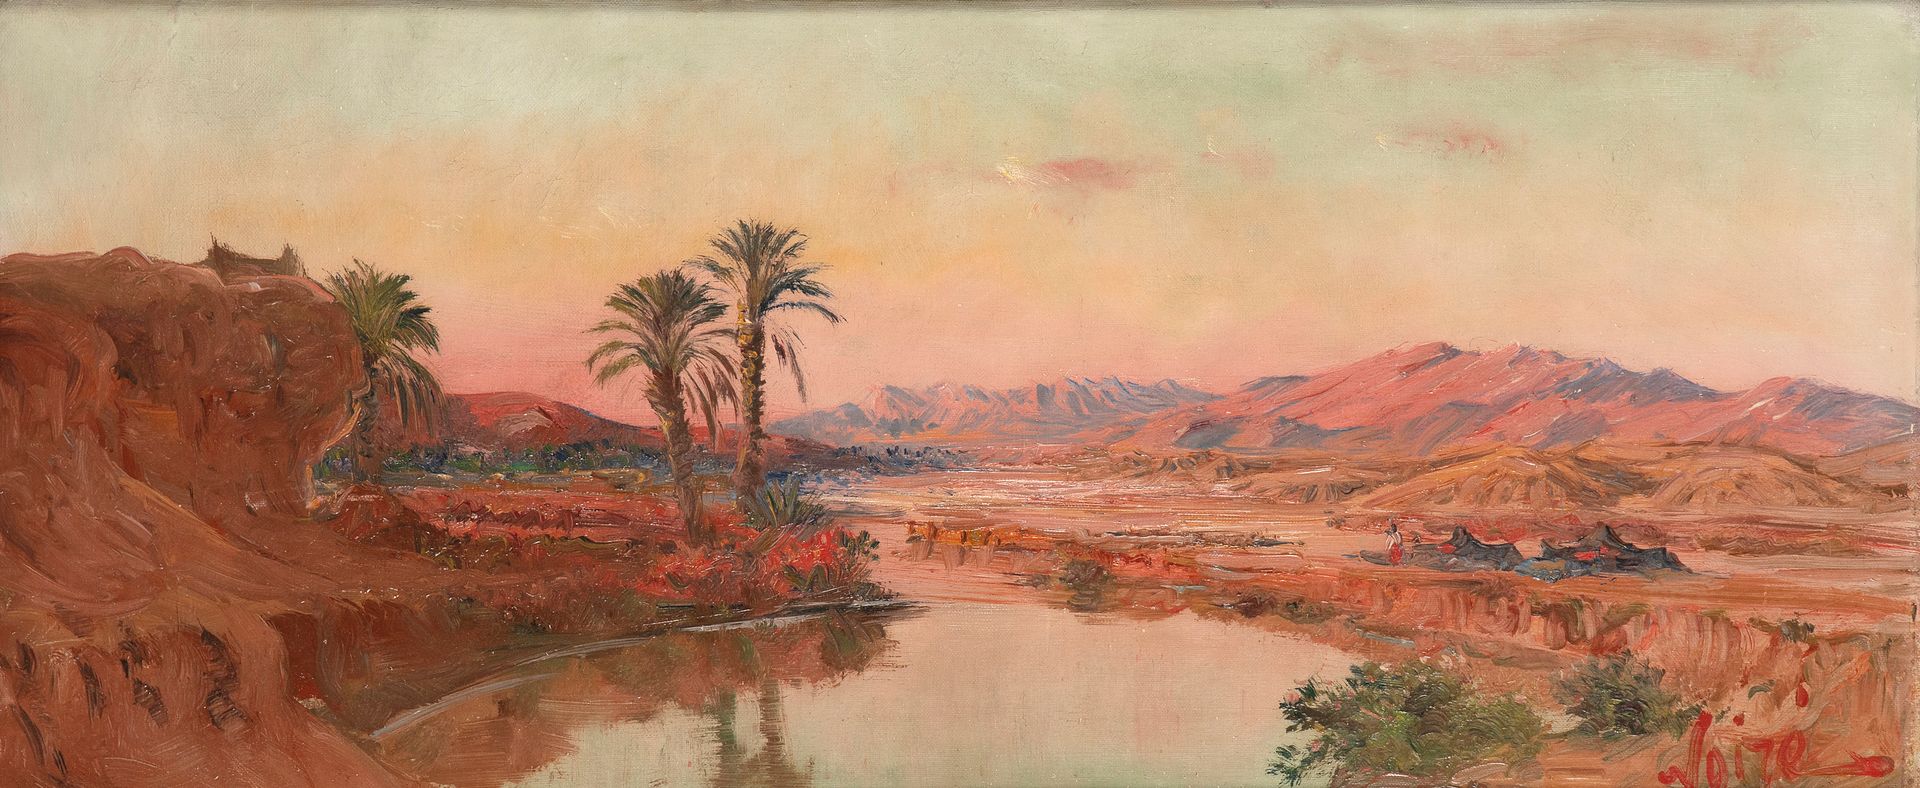 Maxime NOIRE (Guinglange 1861-Alger 1927) The camp on the edge of the wadi, Alge&hellip;